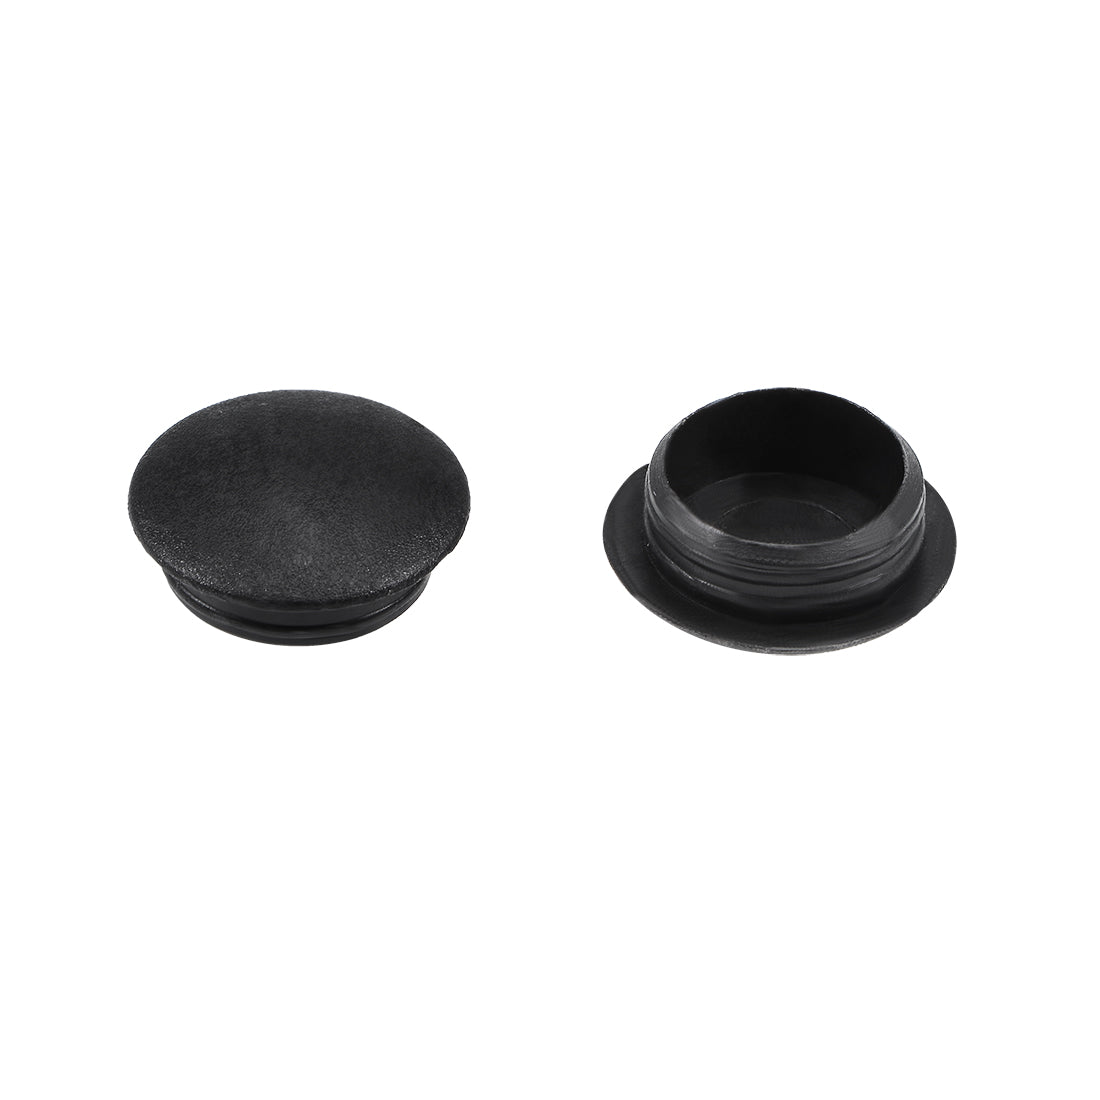 uxcell Uxcell Screw Cap Cover,50Pcs 12mm Dia Black Plastic Locking Hole Plug Button Top Flush Type for Cabinet Cupboard Shelf